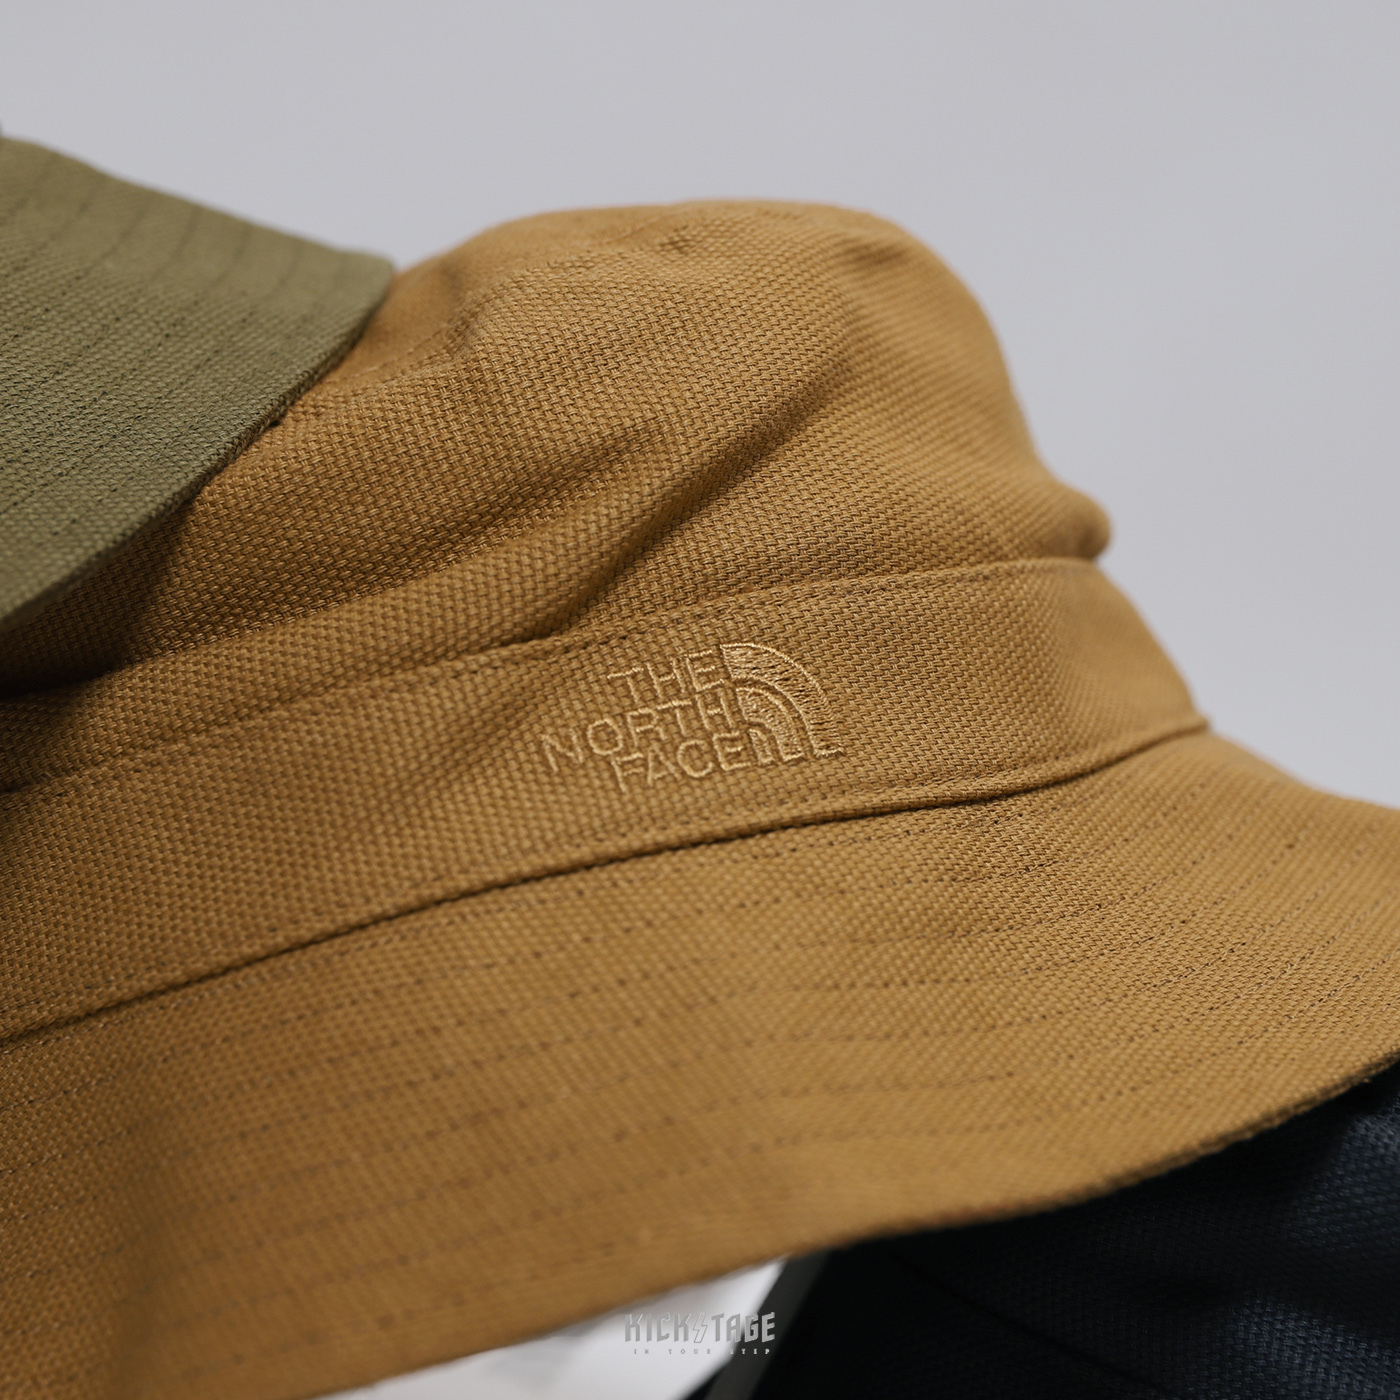 THE NORTH FACE TNF MOUNTAIN BUCKET HAT 灰黑焦糖棕